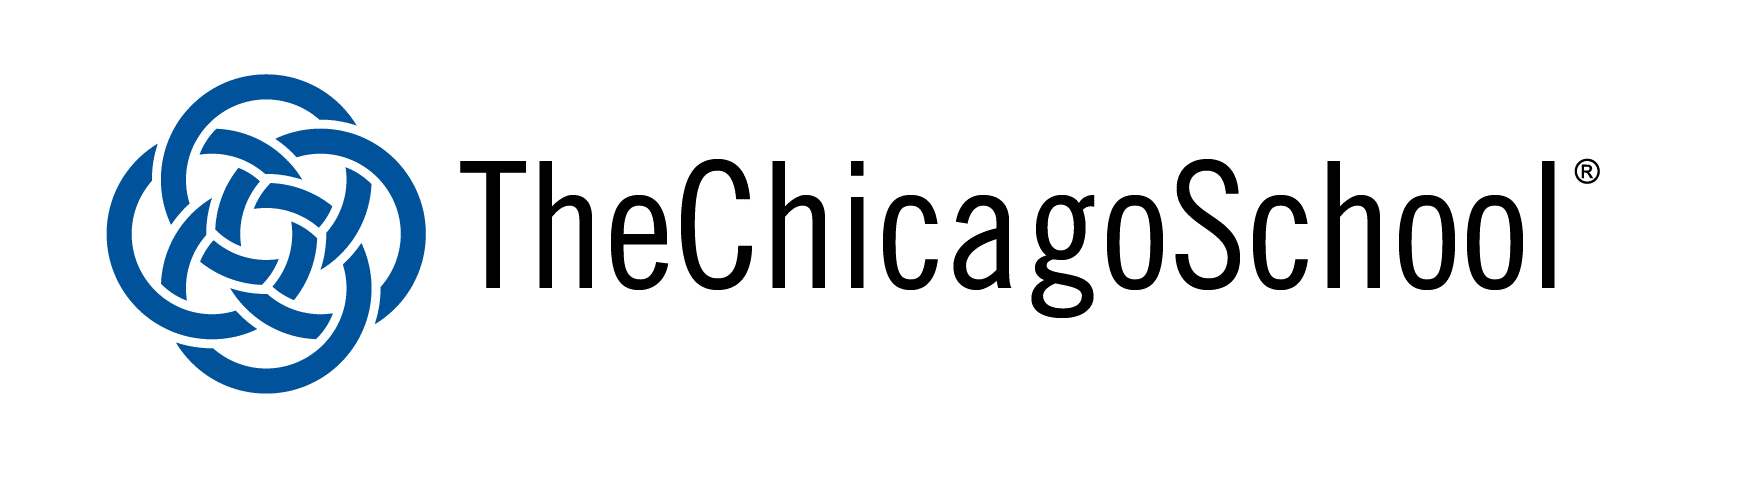 Post - Master’s Certificate in Applied Behavior Analysis Program at The Chicago School of Professional Psychology